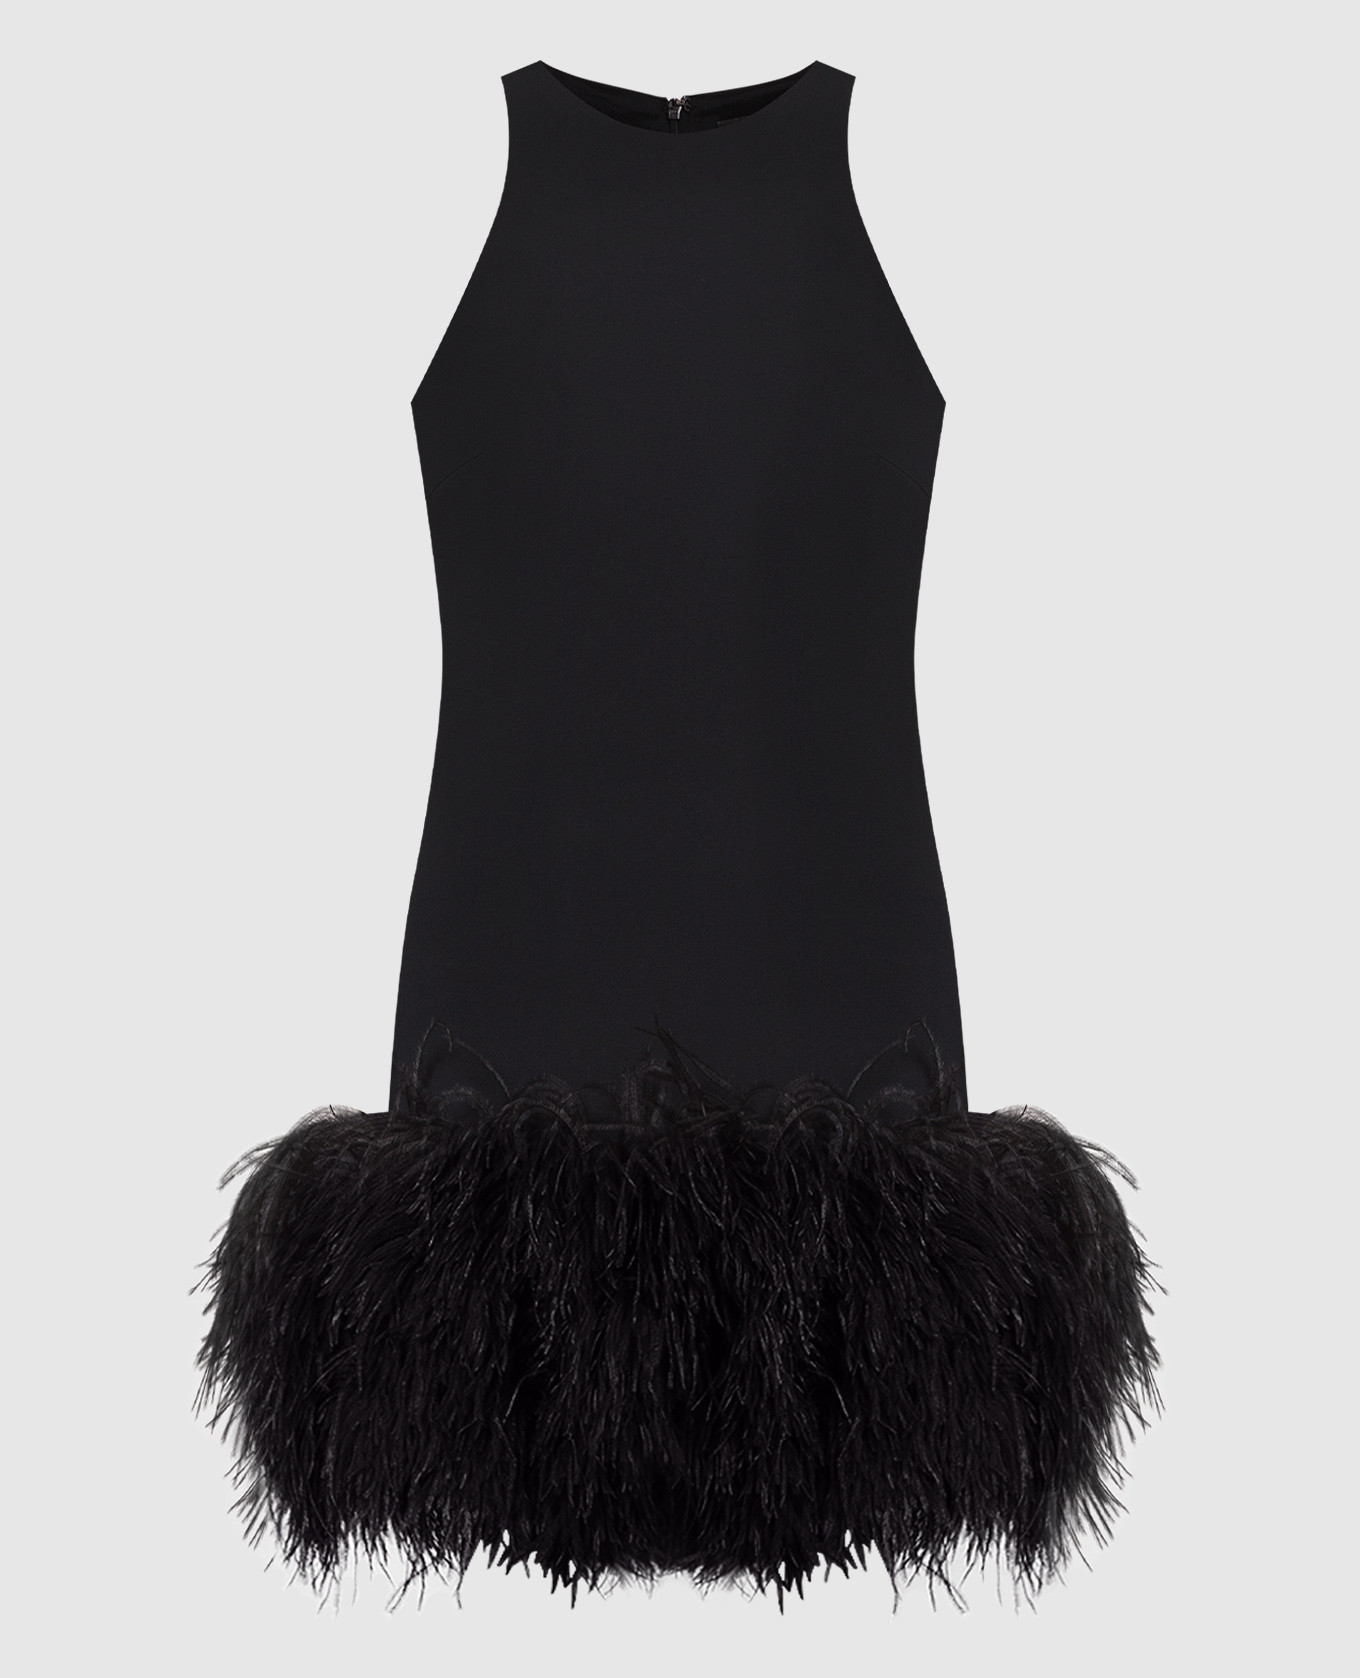 Black mini dress with ostrich feathers